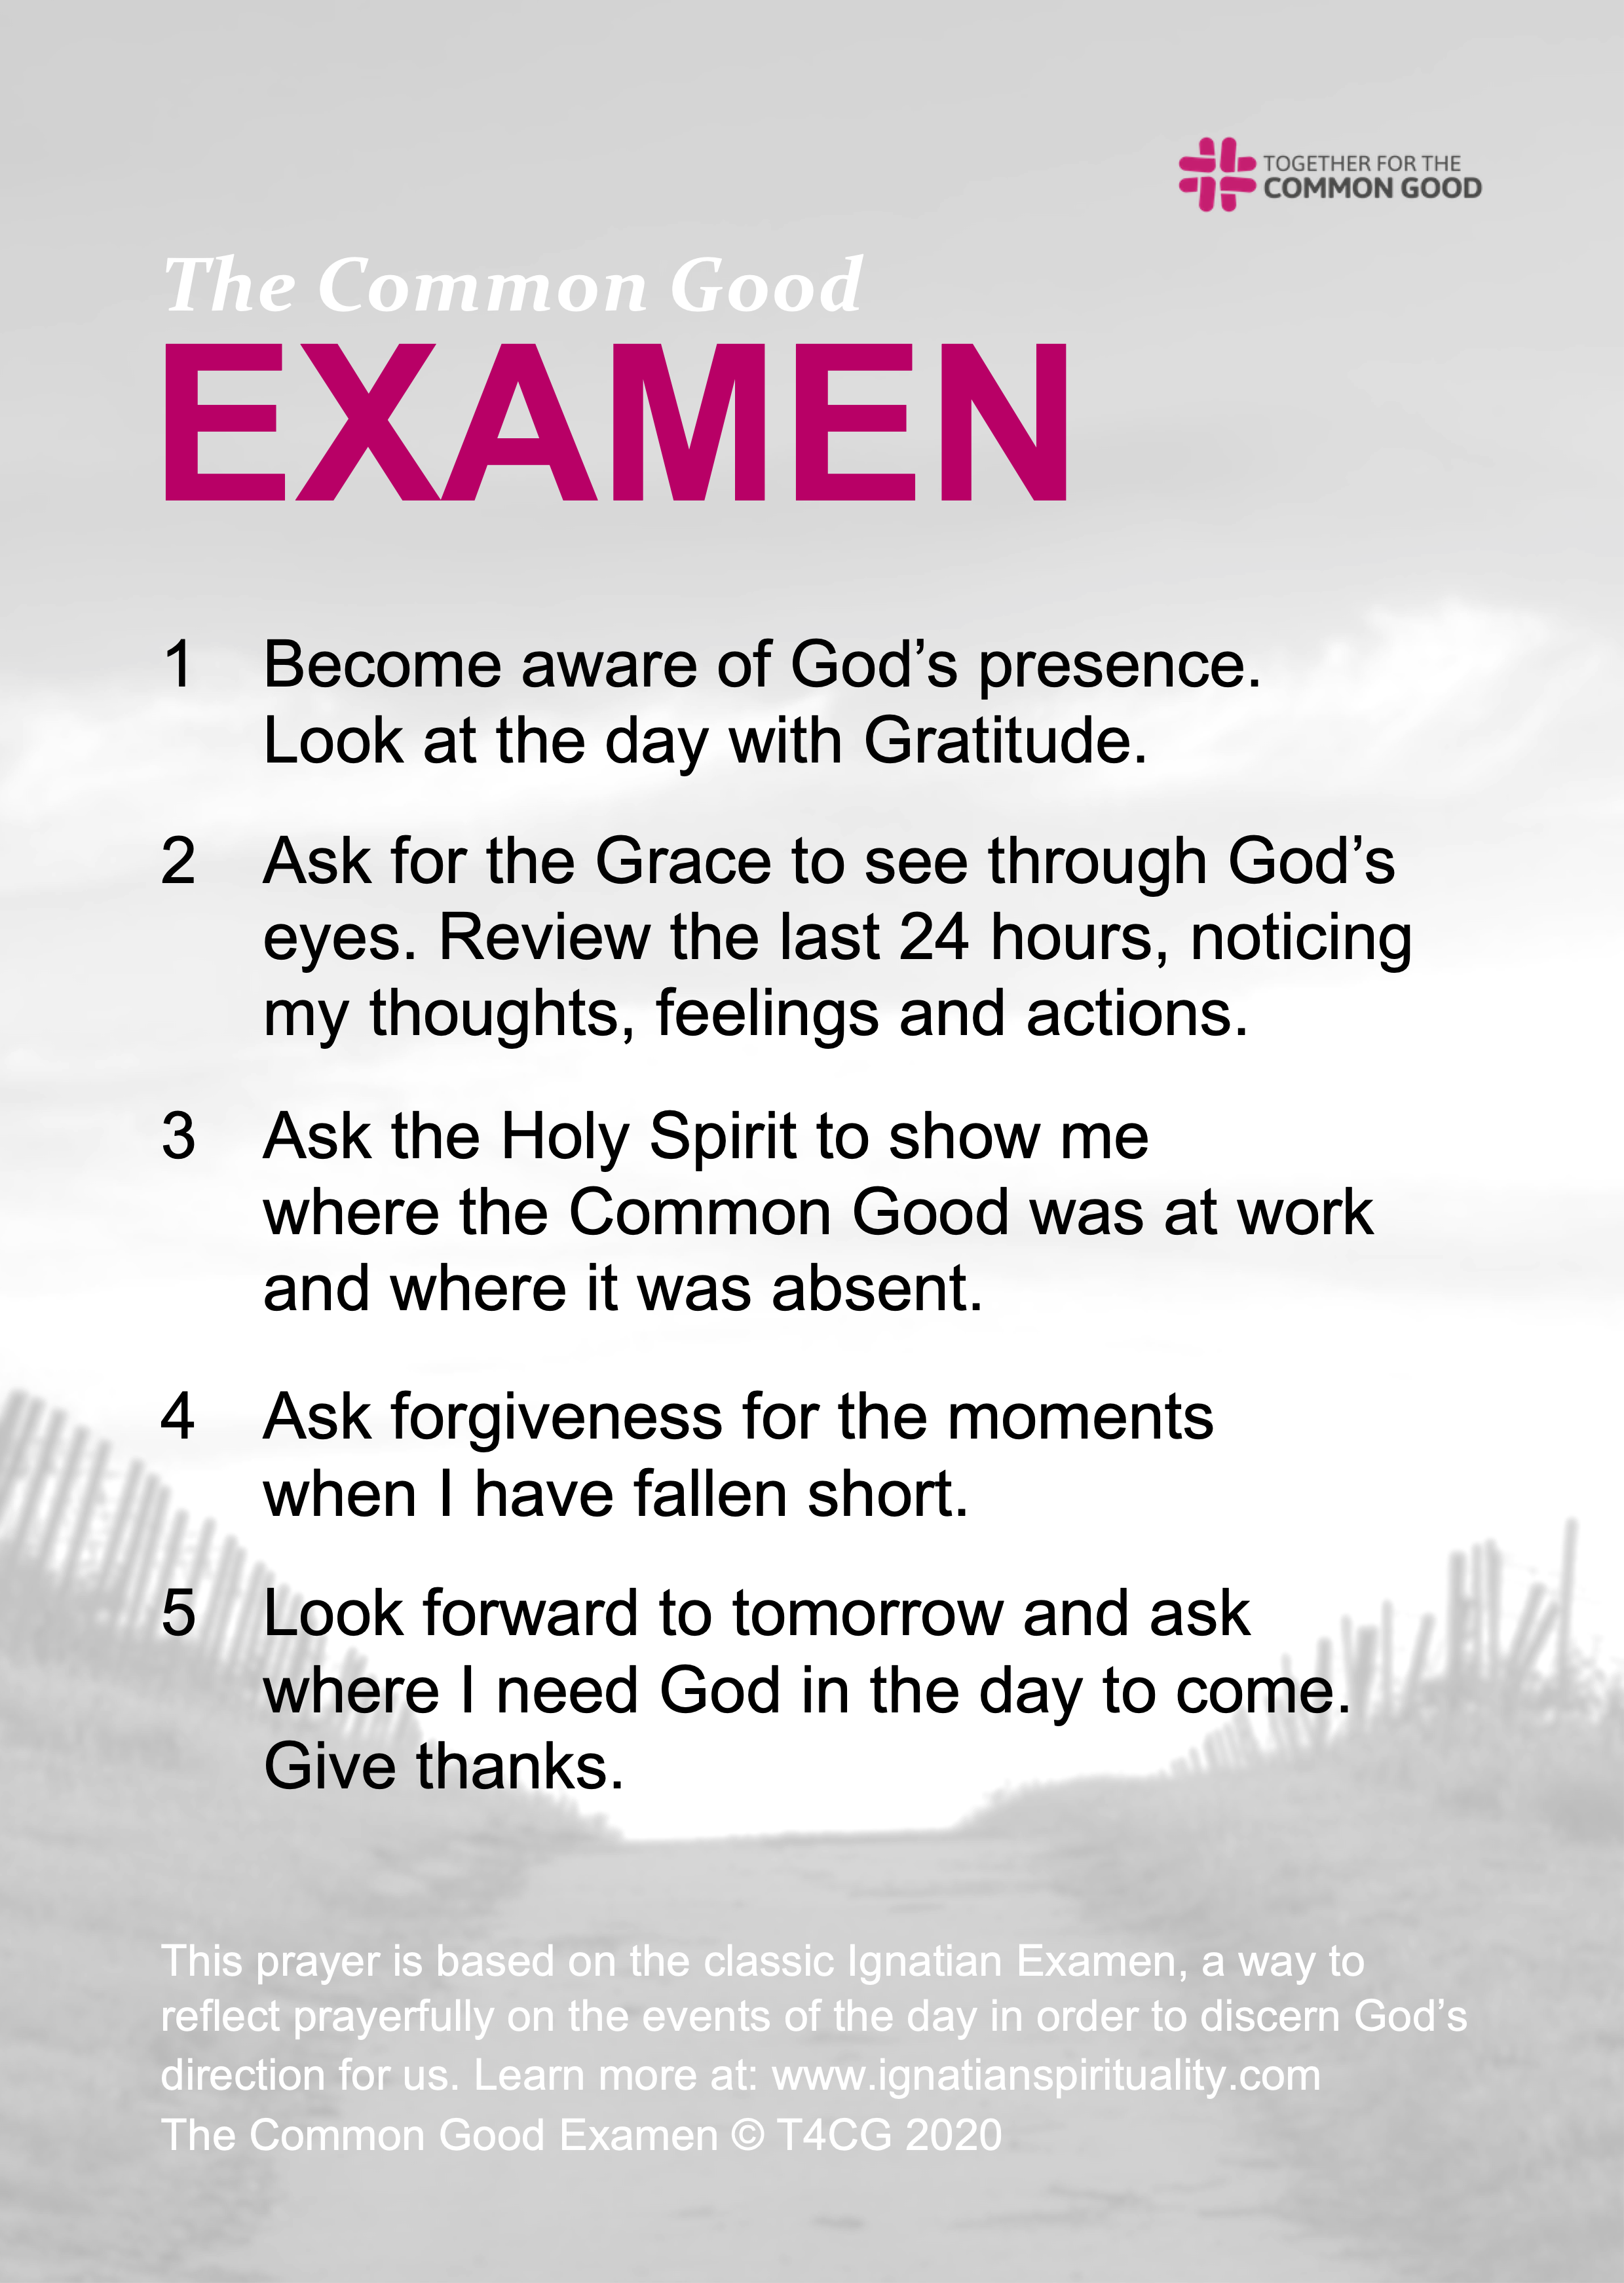 Featured Image for “The Common Good Examen”